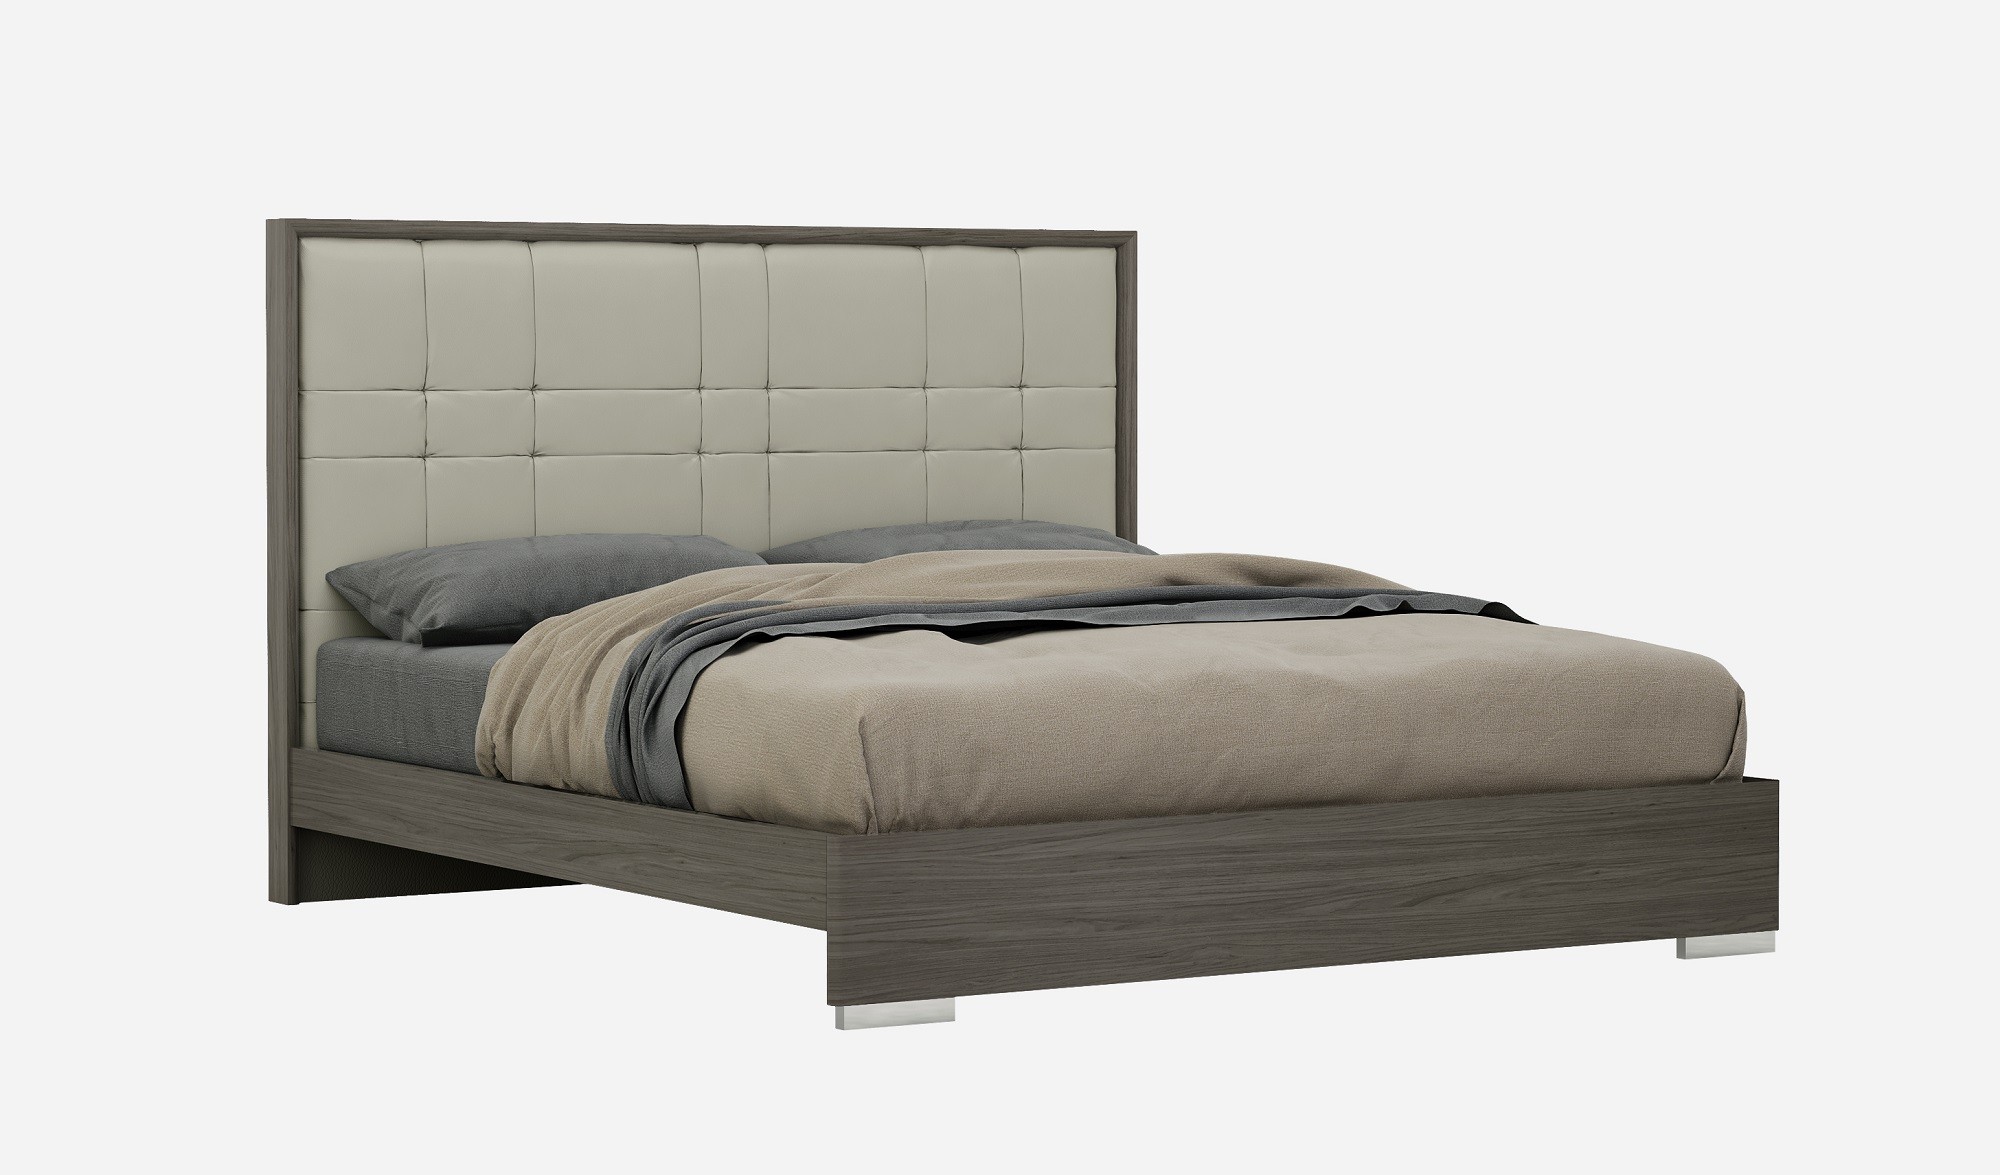 Exclusive Leather High End Bedroom Furniture Sets feat Wood Grain - Click Image to Close